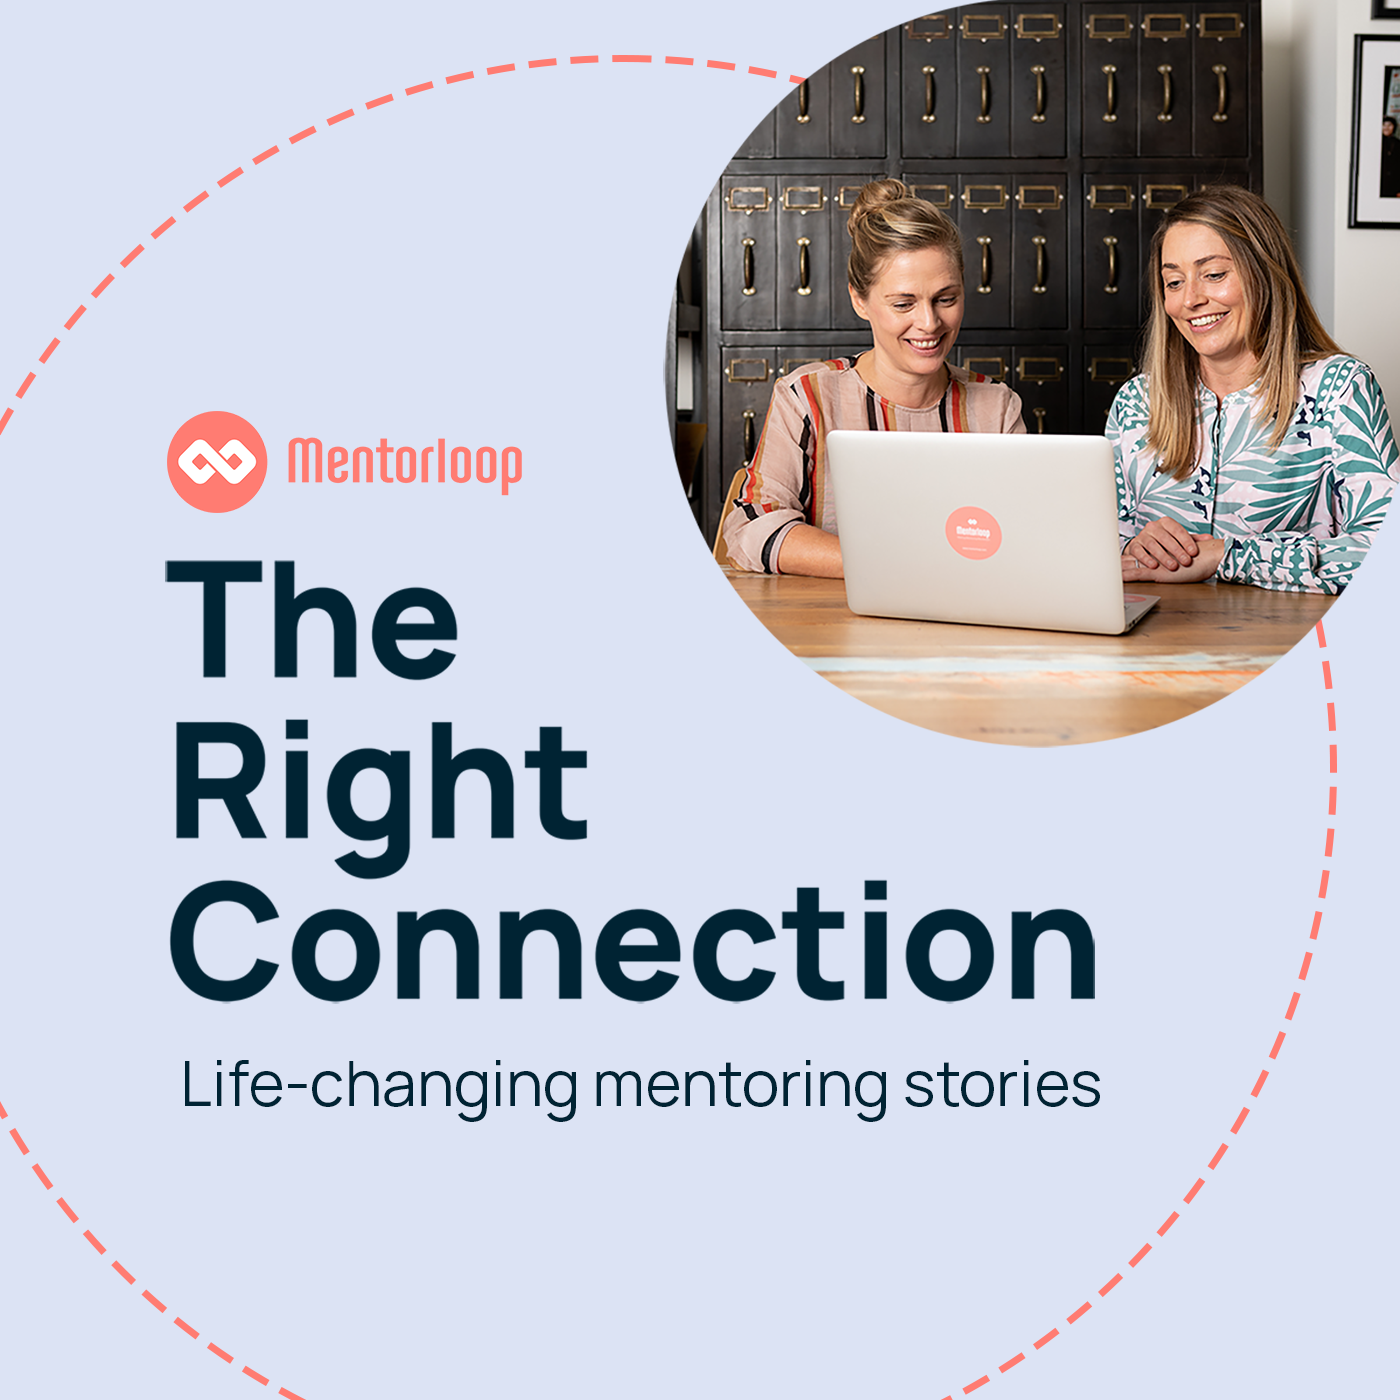 The Right Connection, with Mentorloop